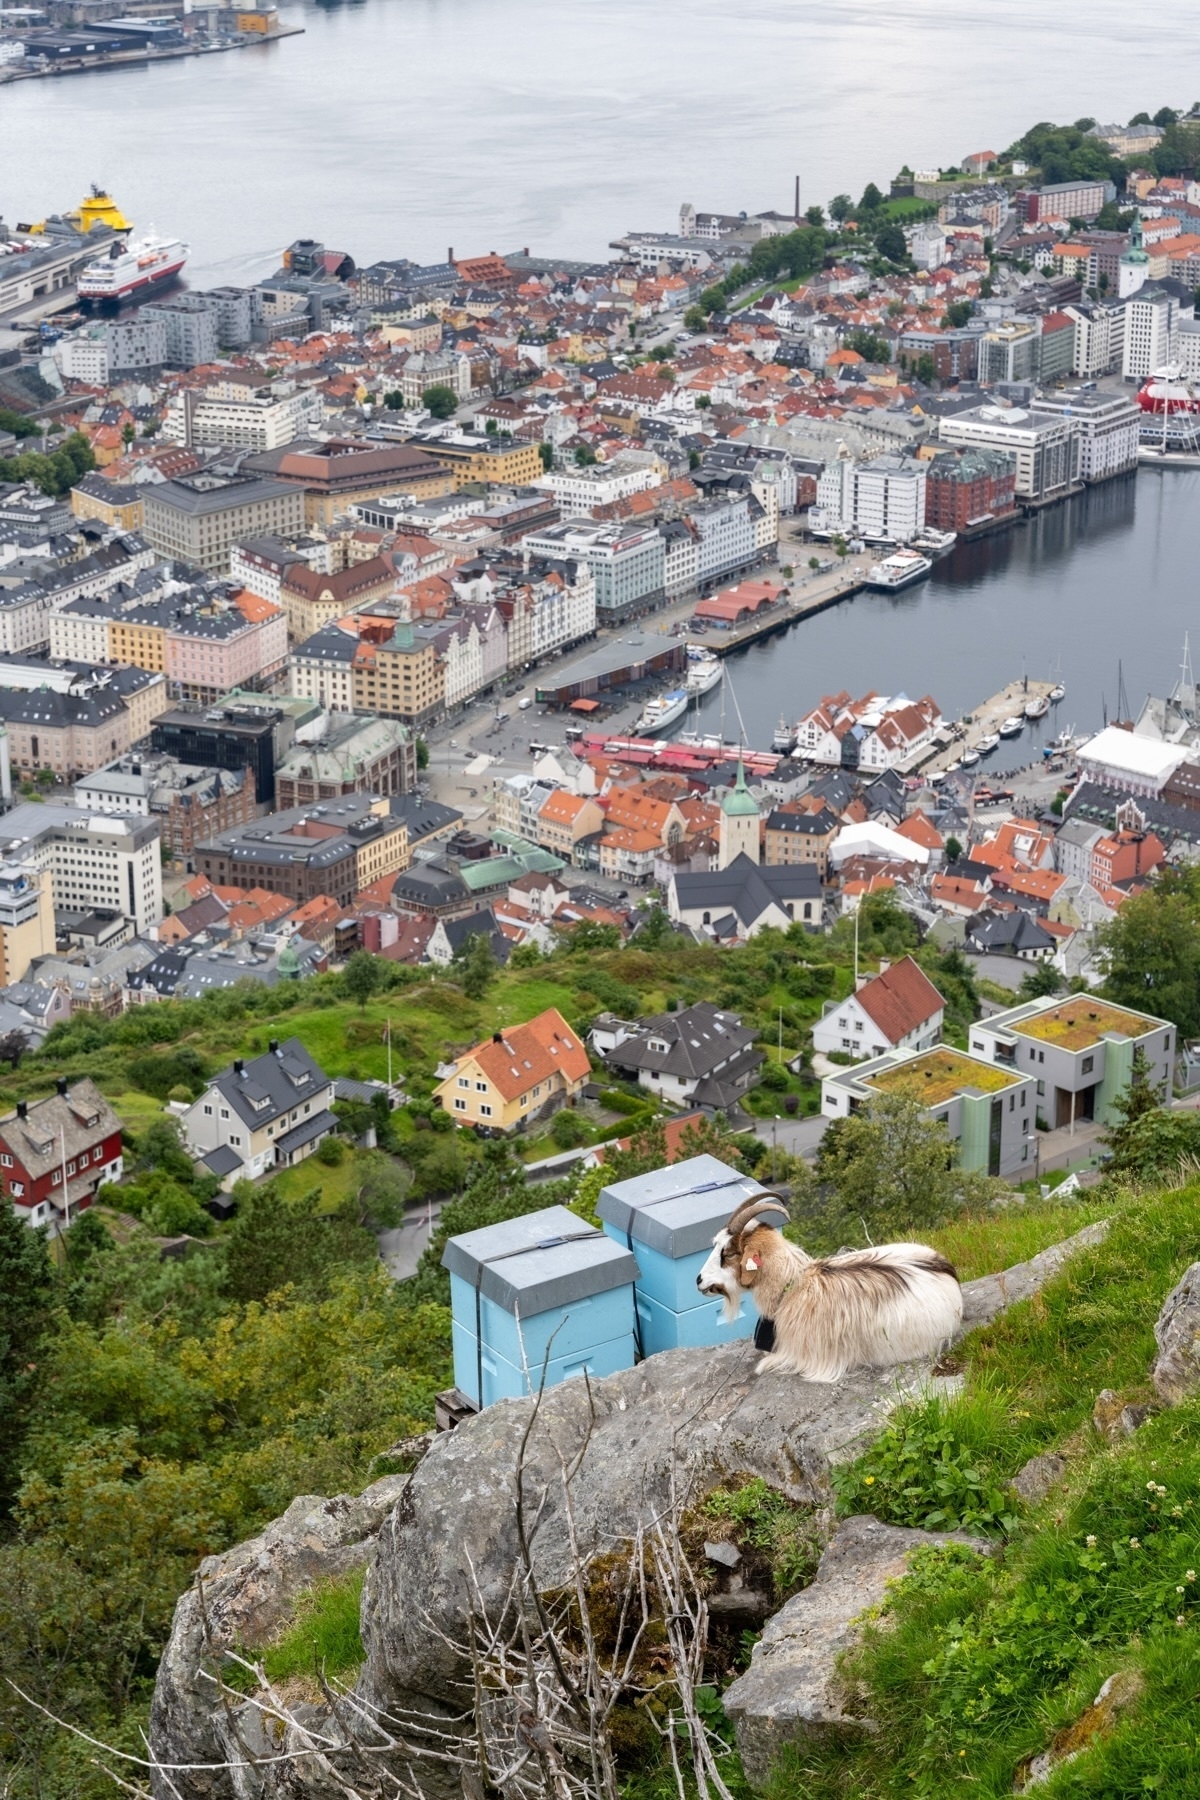 A panoramic view of a coastal city with a harbor, colorful buildings, and residential areas. In the foreground, a goat lies on a rocky ledge near blue beehives.